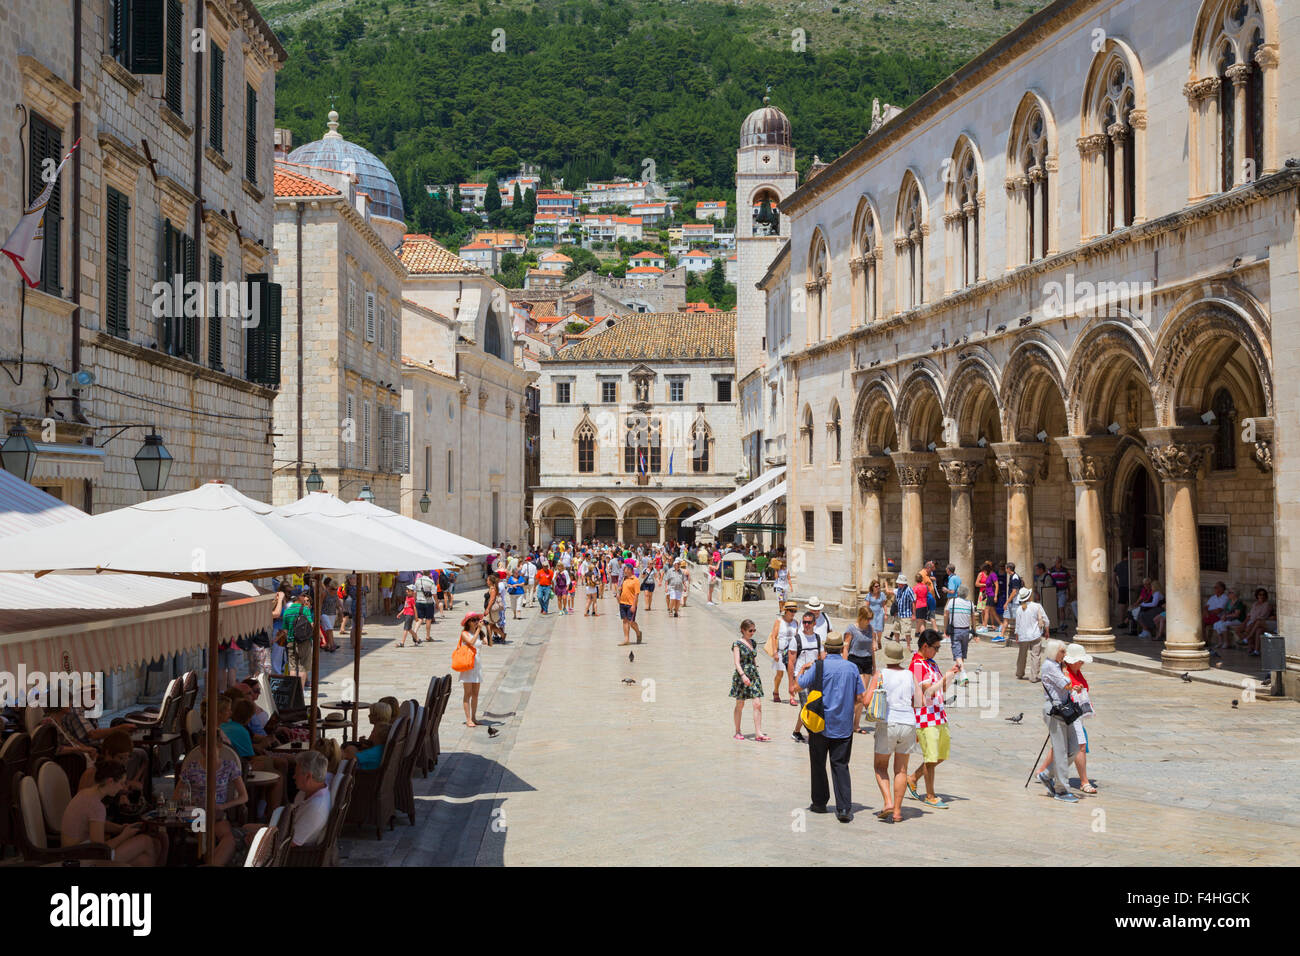 Dubrovnik, Dubrovnik-Neretva County, Croatia.  Pred Dvorom street in old city.  On the right, arches of the Rector's Palace. Stock Photo